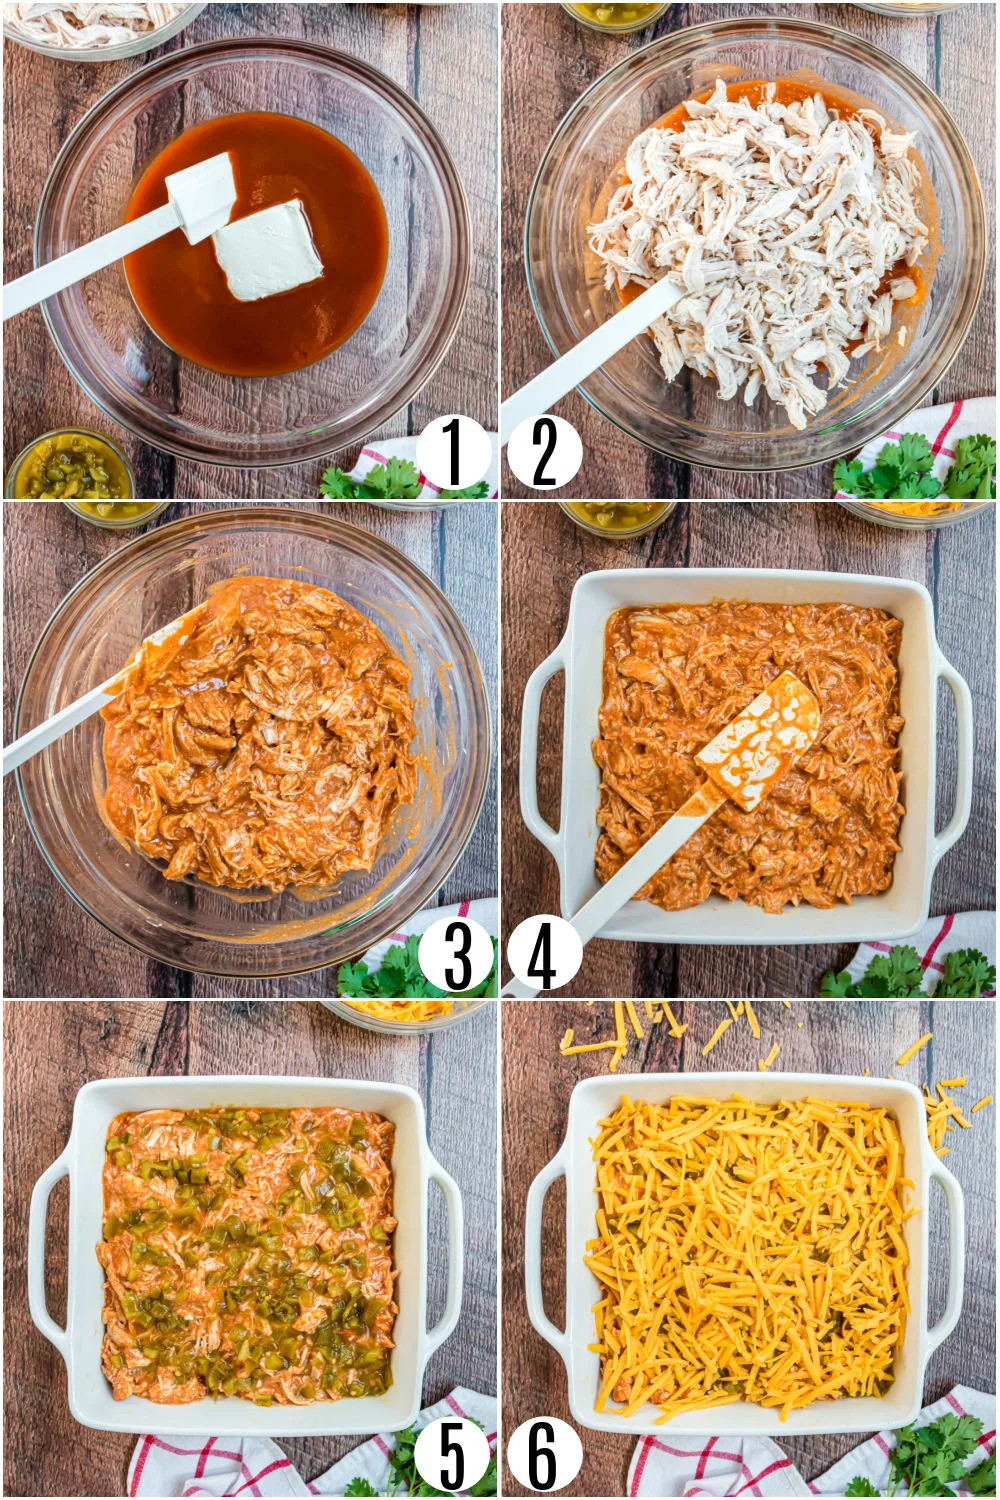 Step by step photos showing how to make keto enchilada casserole.